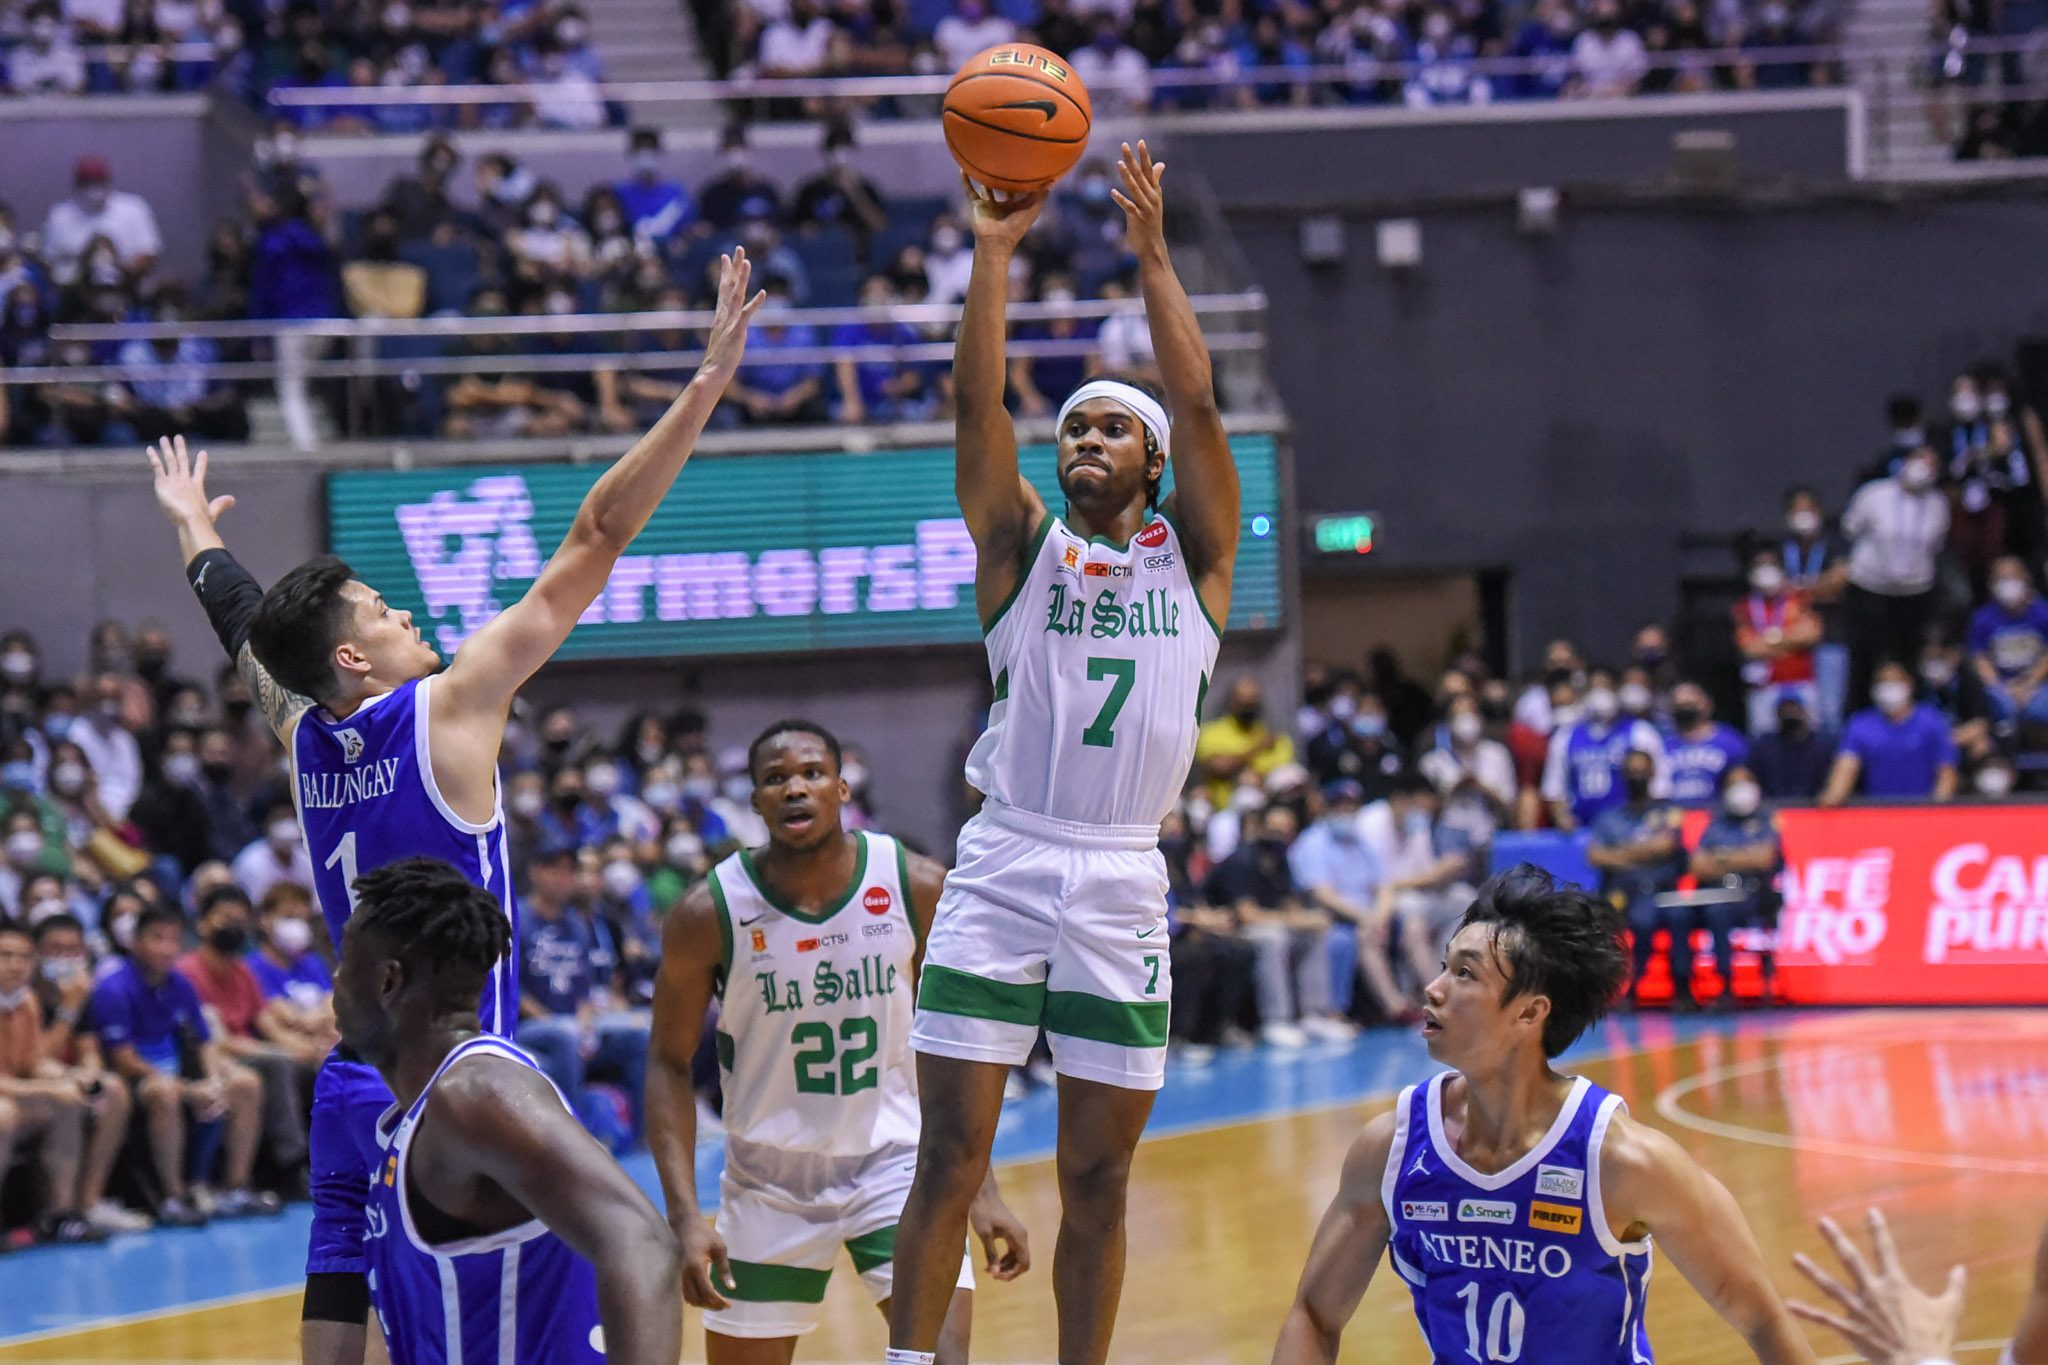 Winston carries La Salle late, helps snaps 5-year loss streak to rival Ateneo